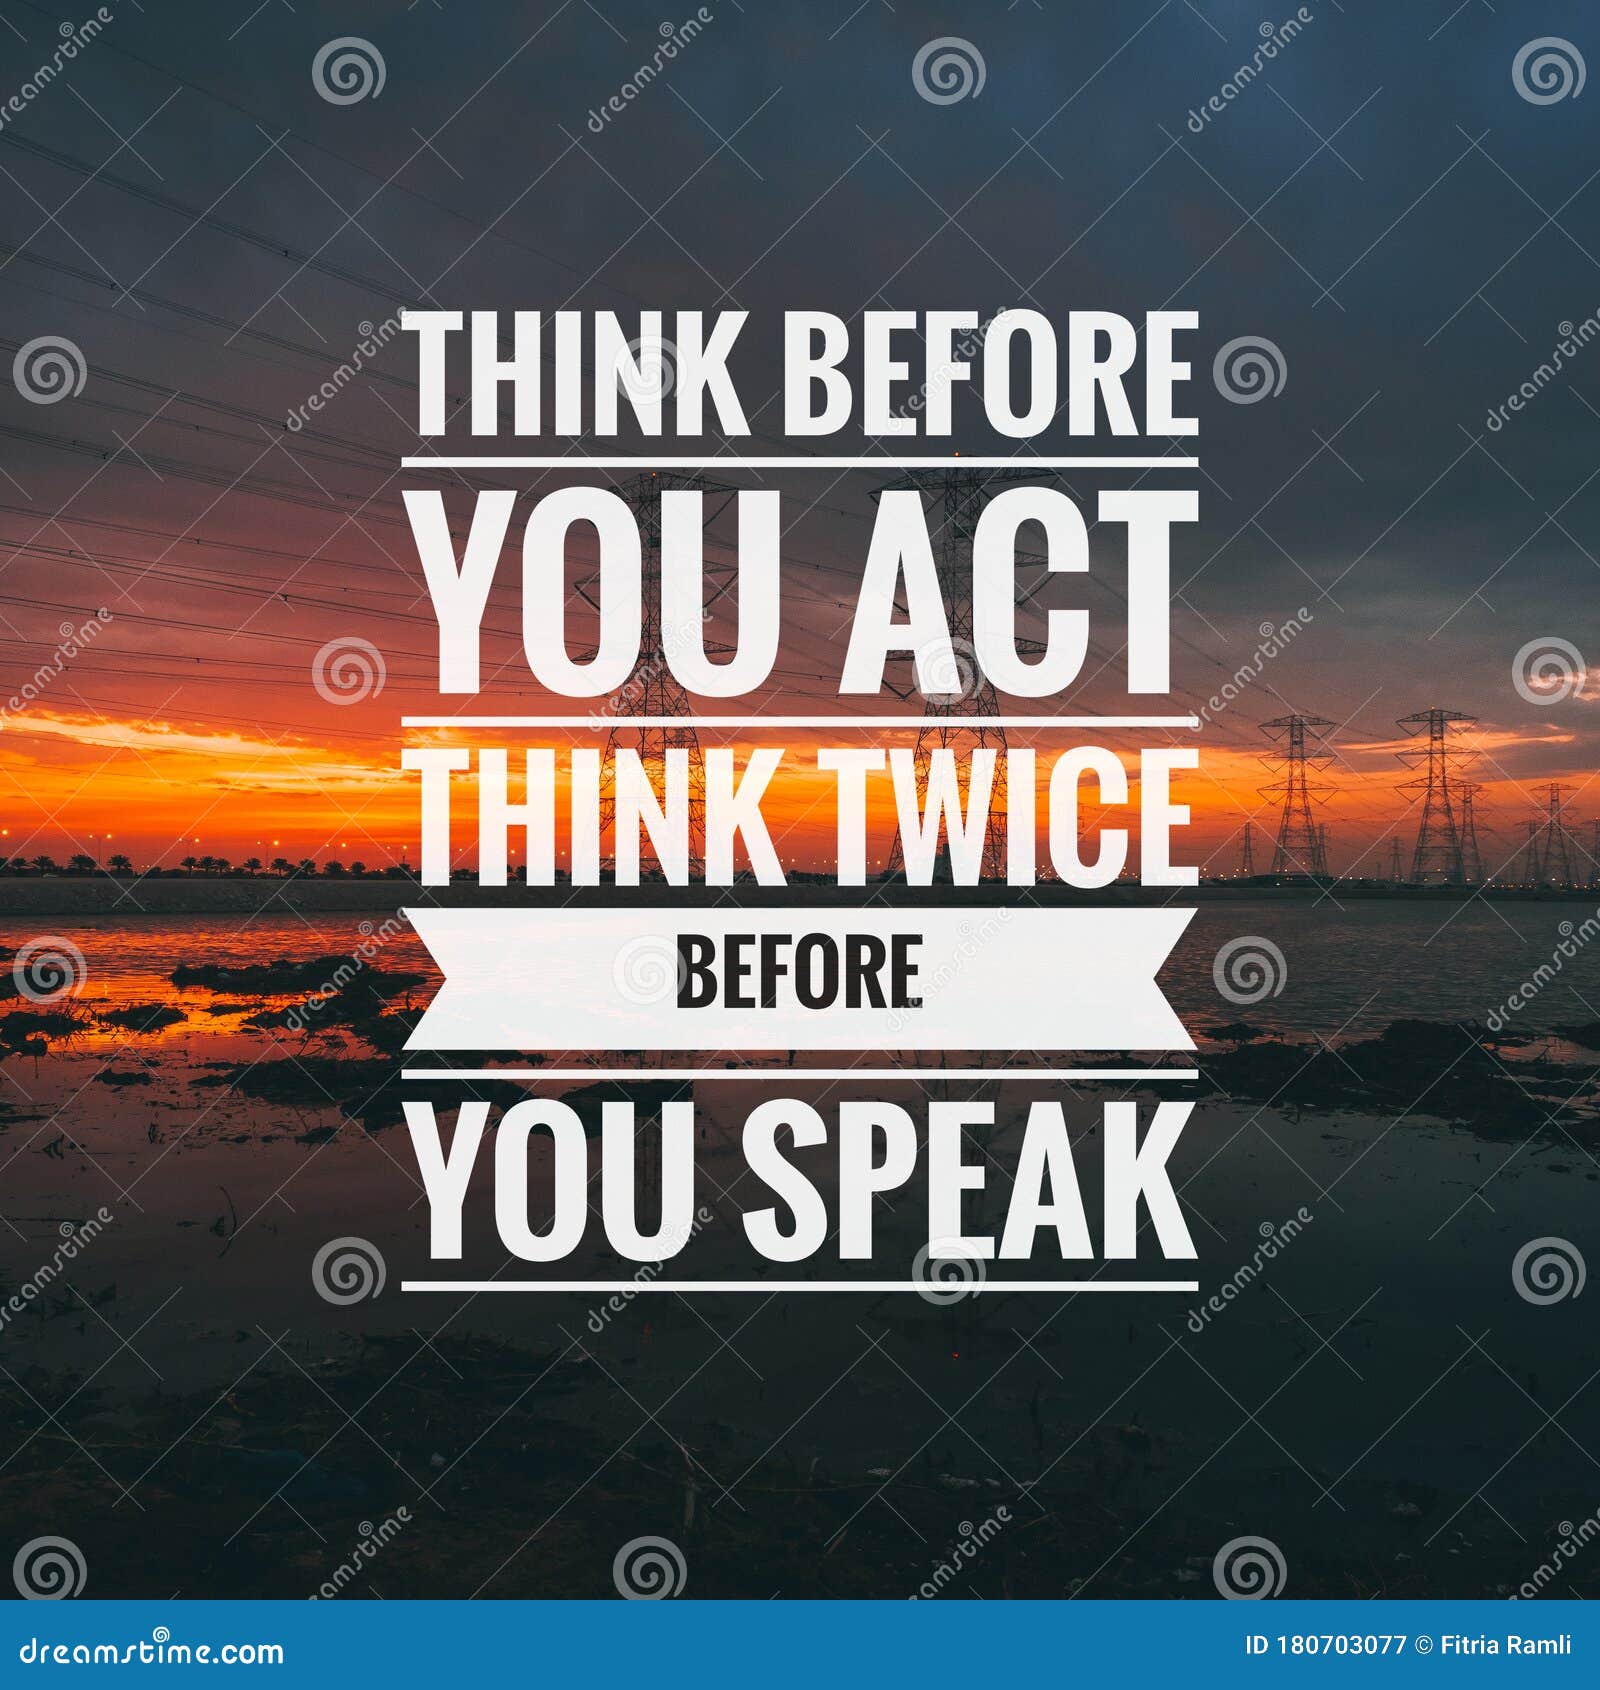 Motivational Quote On Sunset Background - Think Before You Act Think Twice Before You Speak. Stock Image - Image Of Color, Sunset: 180703077